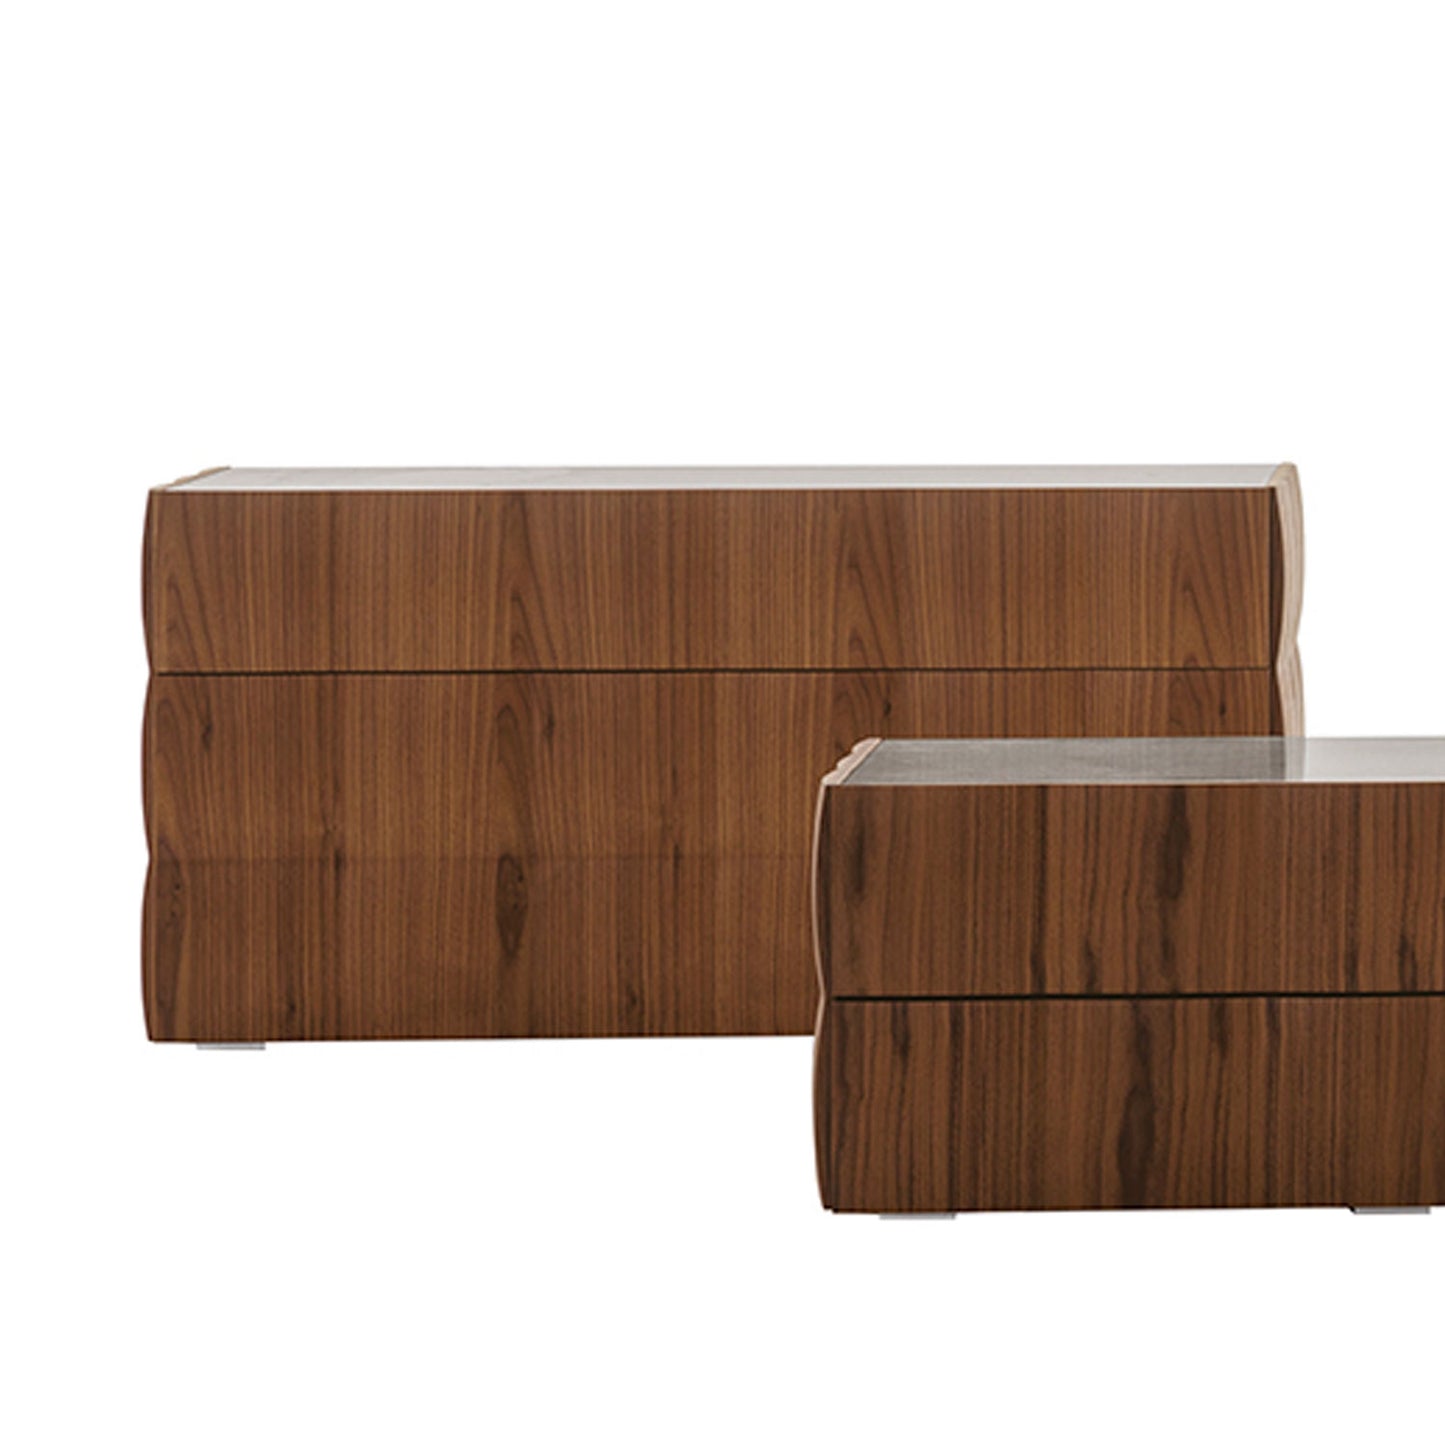 Venice Chest of Drawers by Tonin Casa